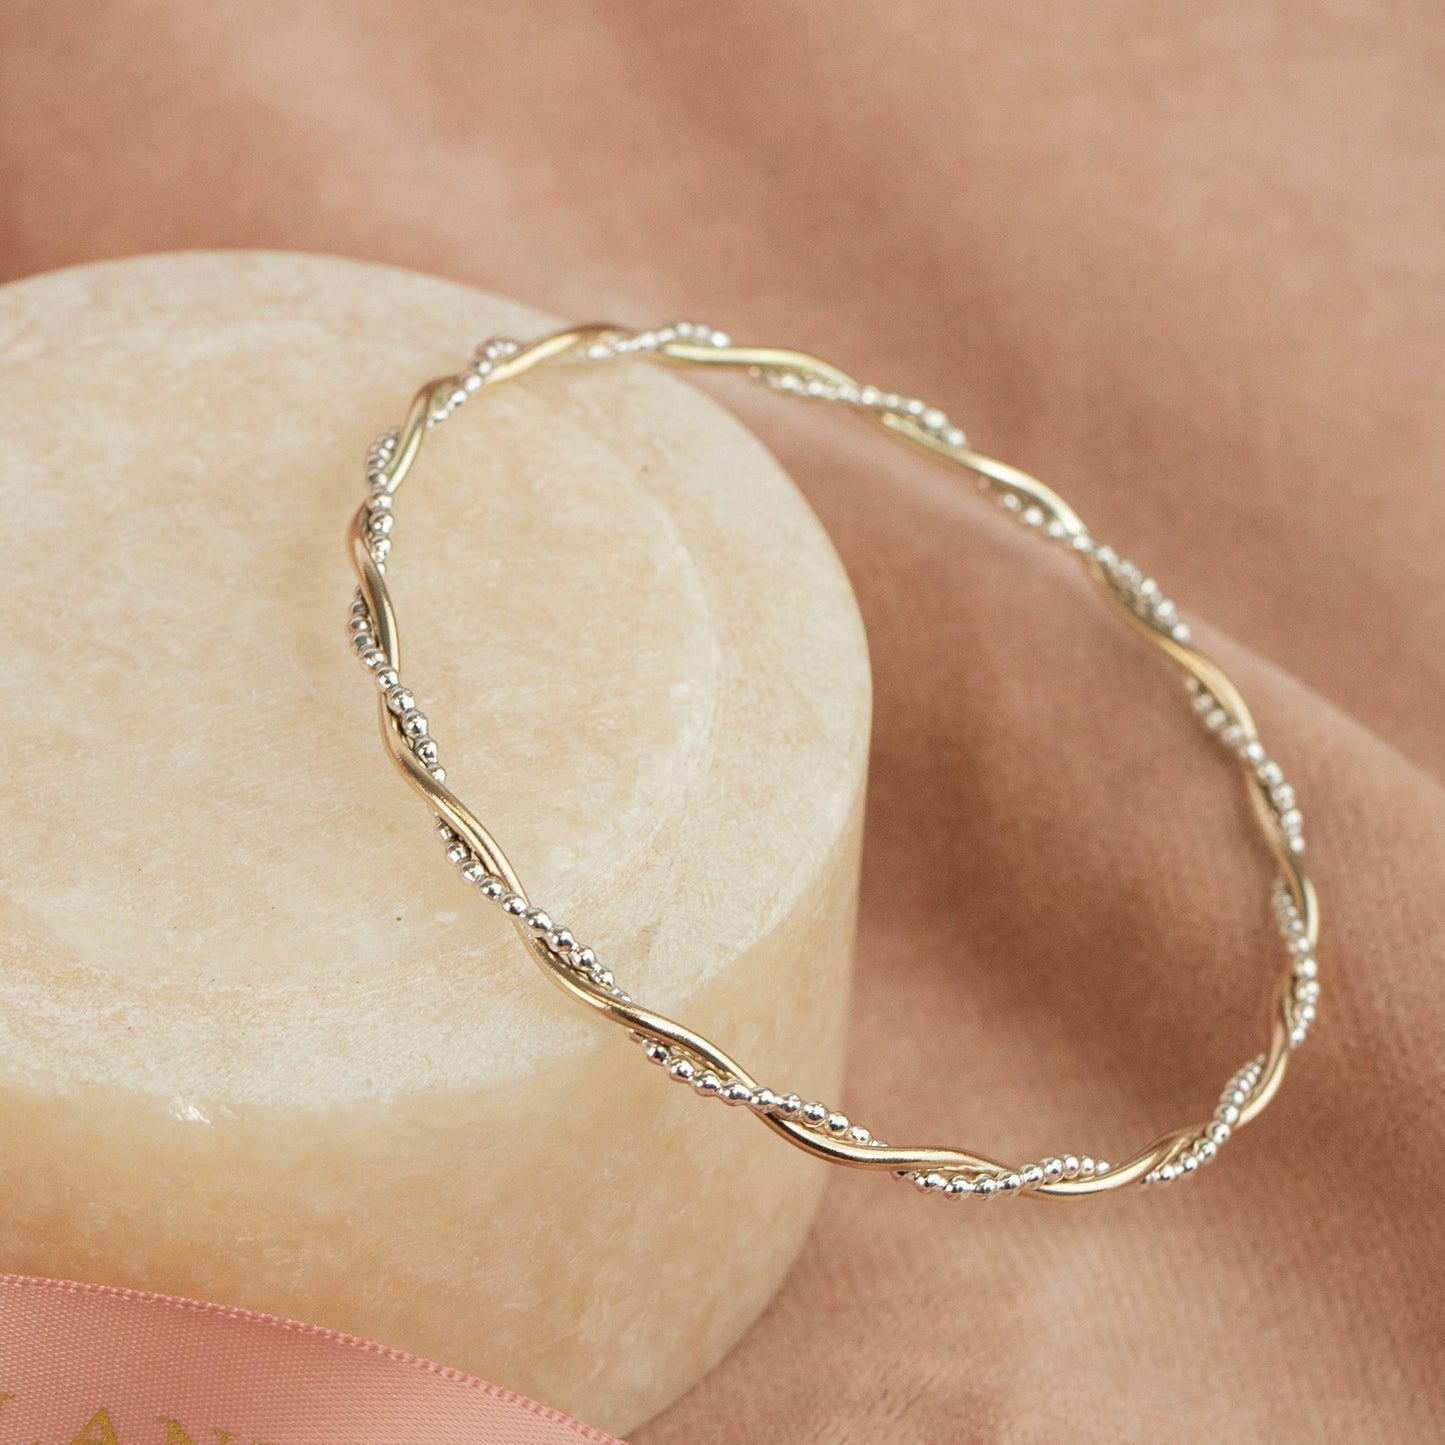 Entwined Bangle - linked for a lifetime